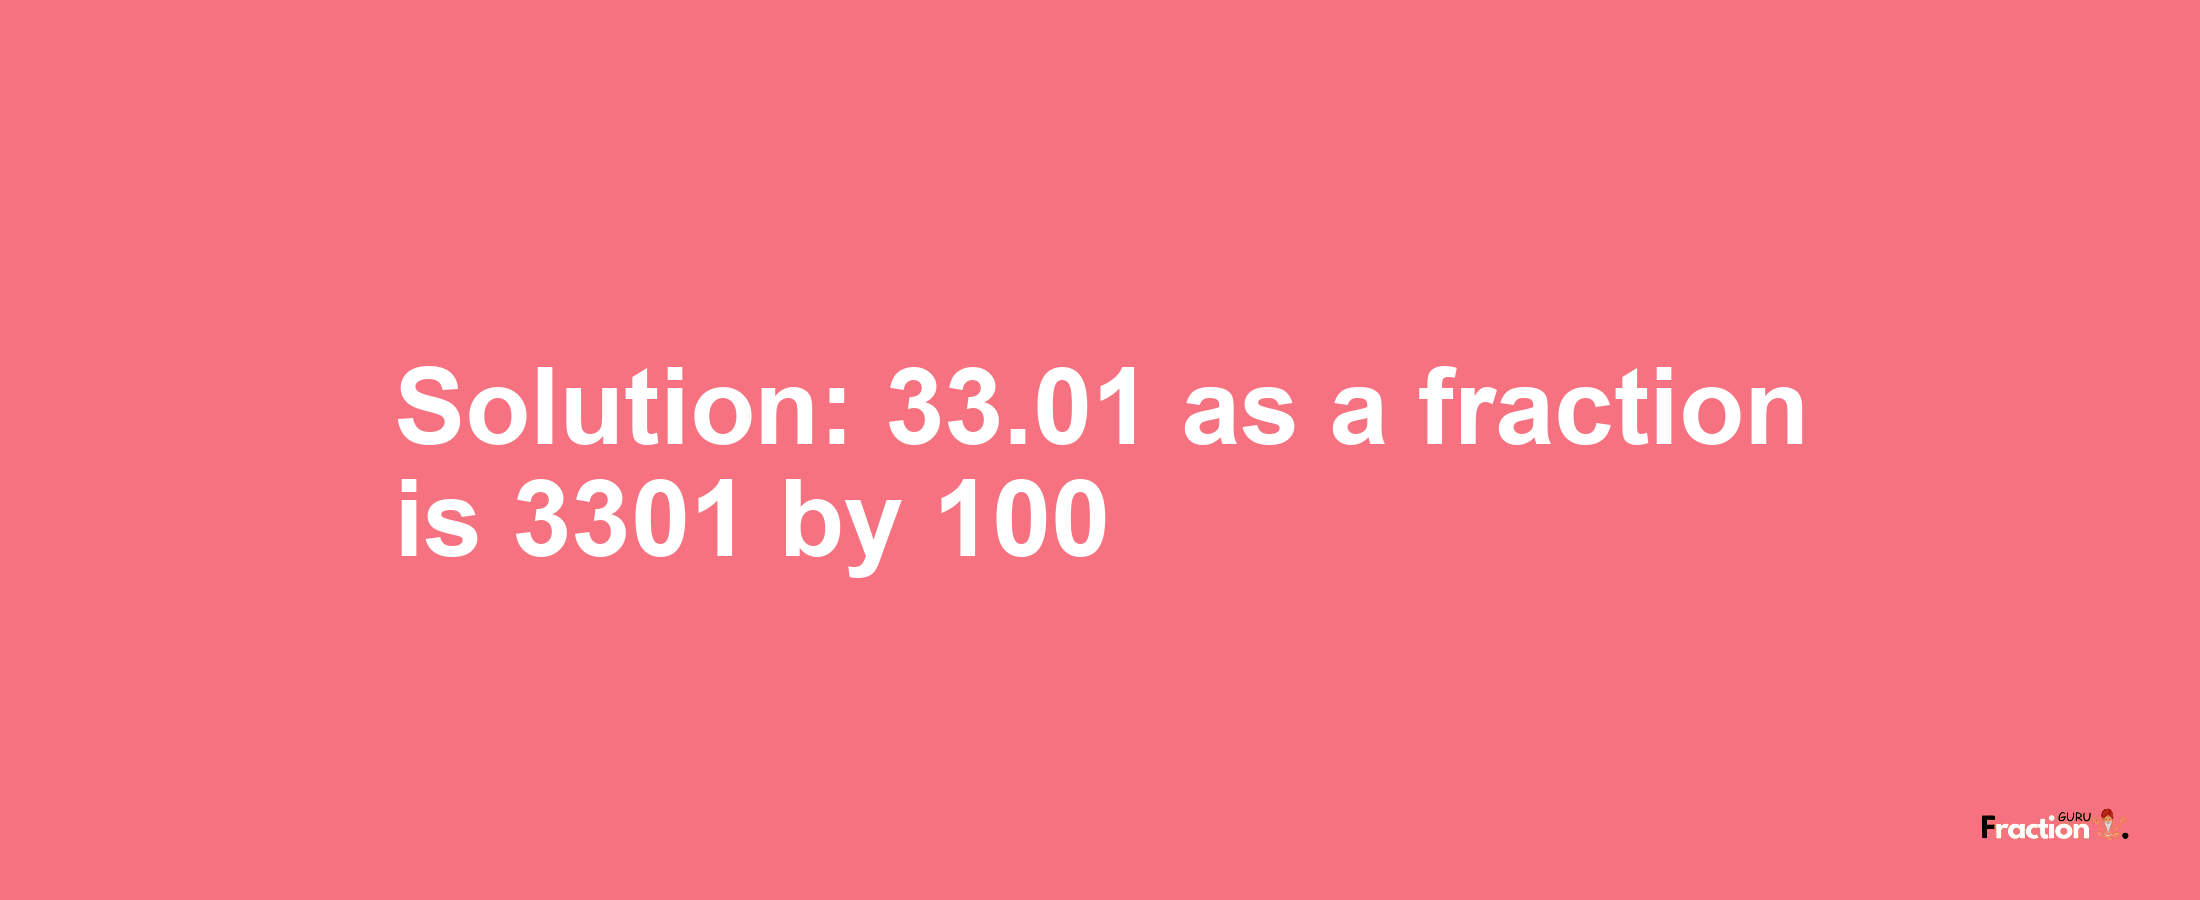 Solution:33.01 as a fraction is 3301/100